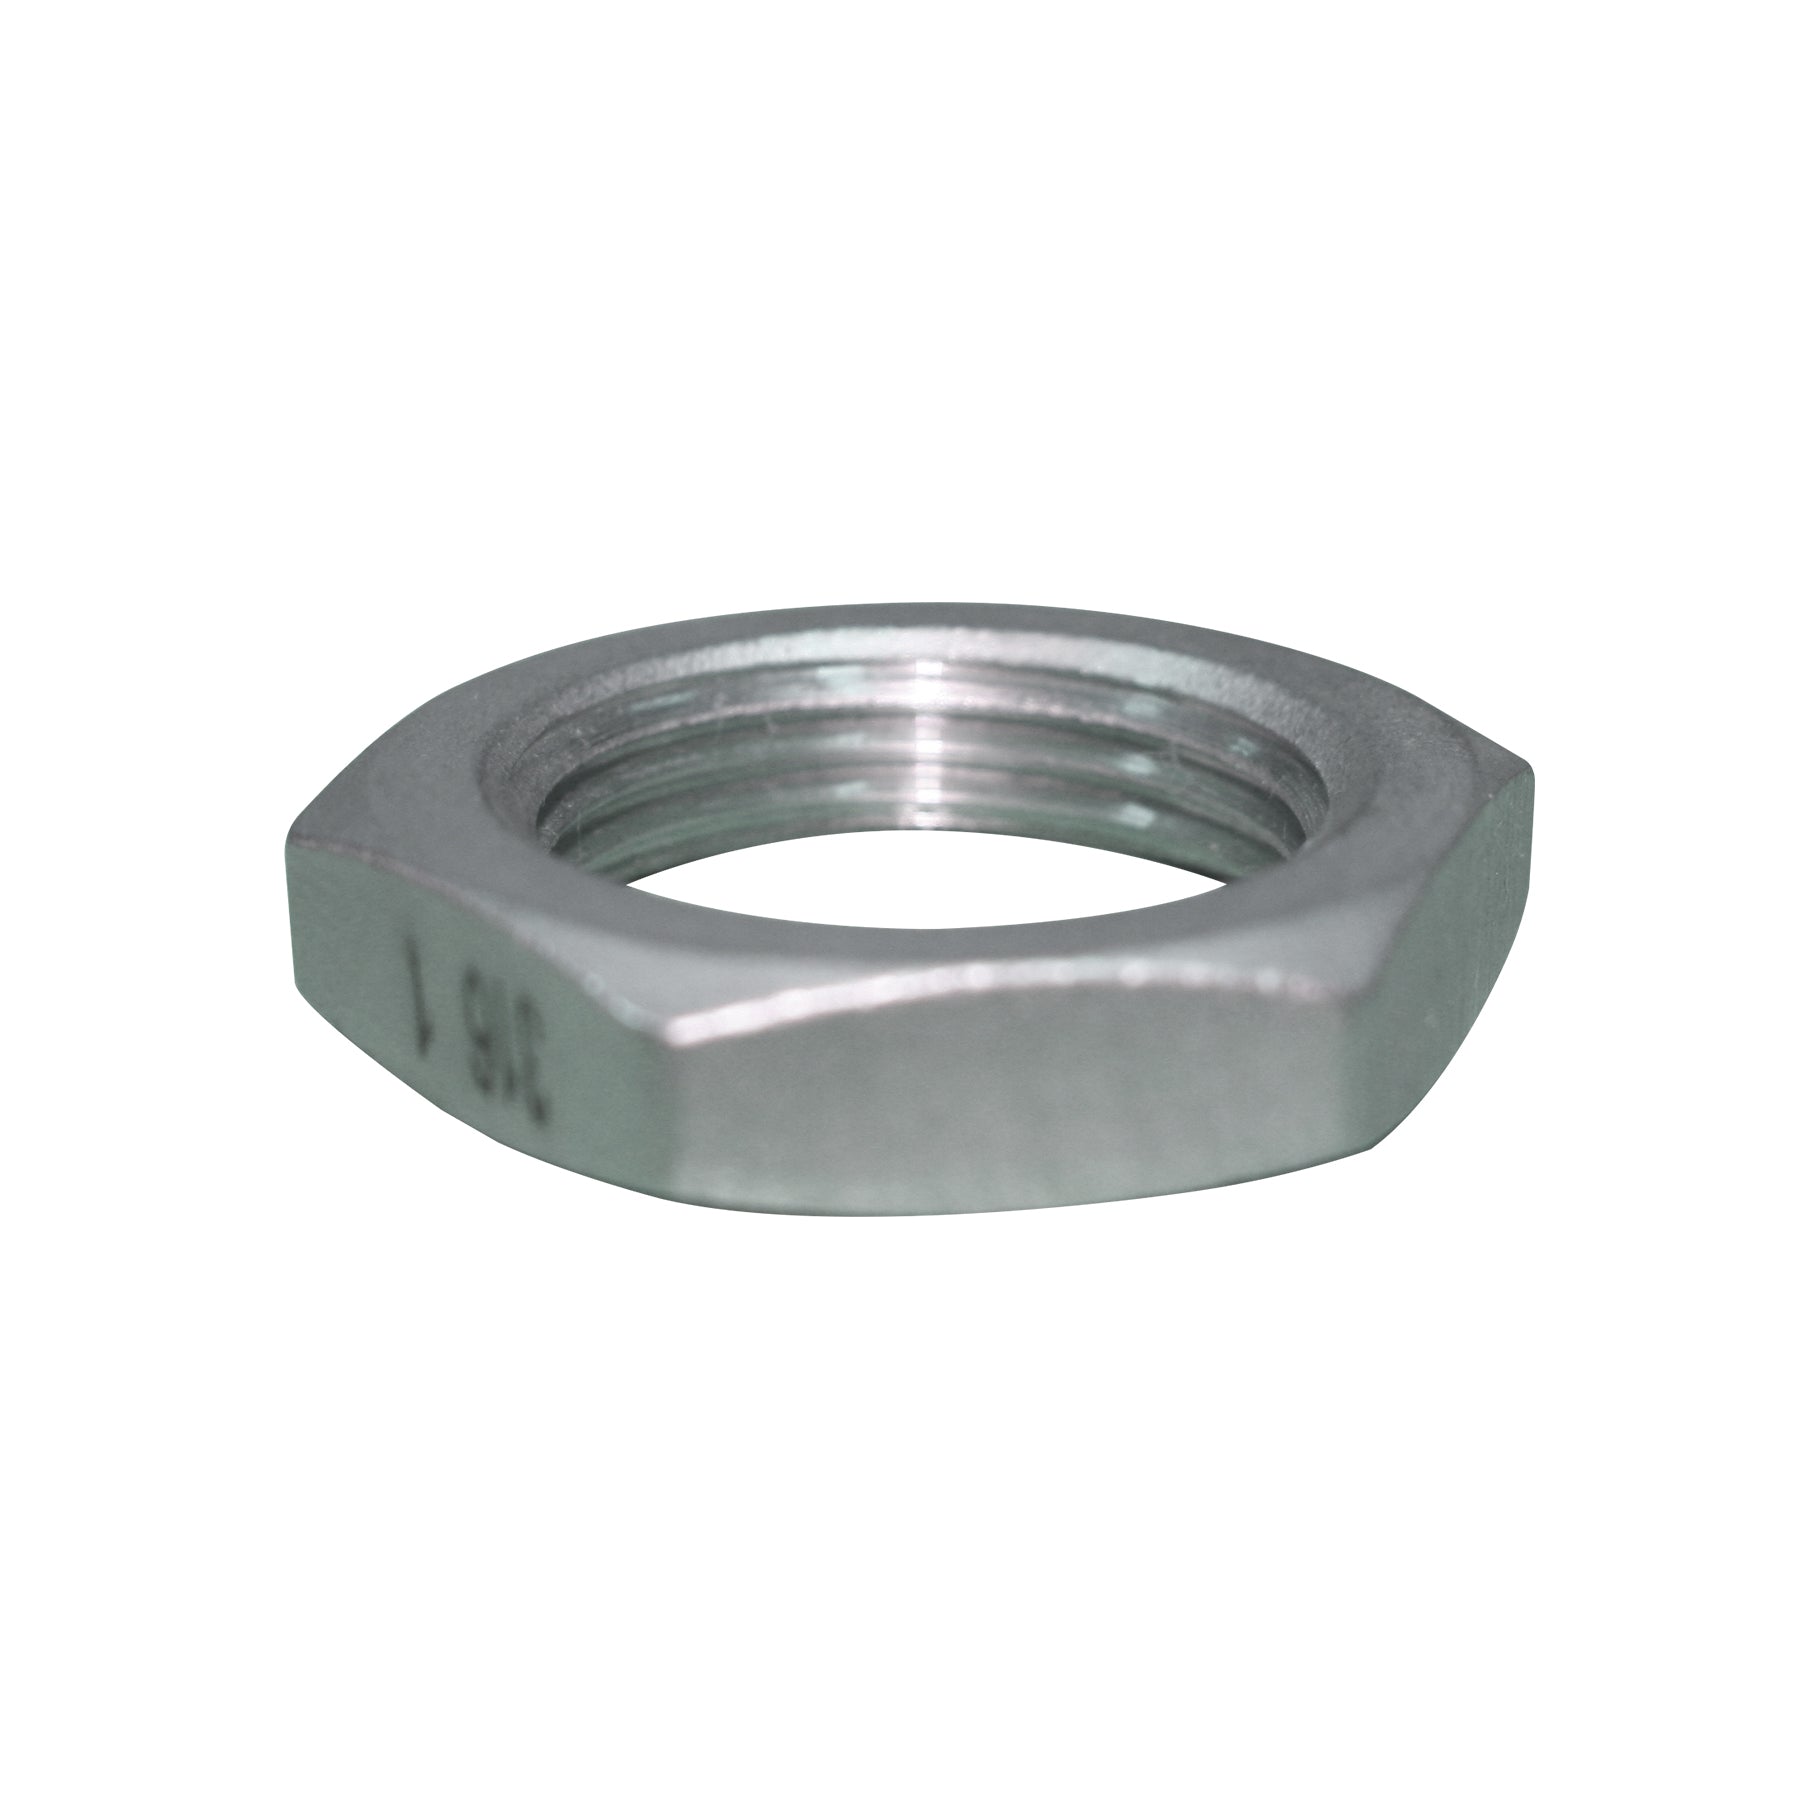 1 4 stainless steel back nut ss150